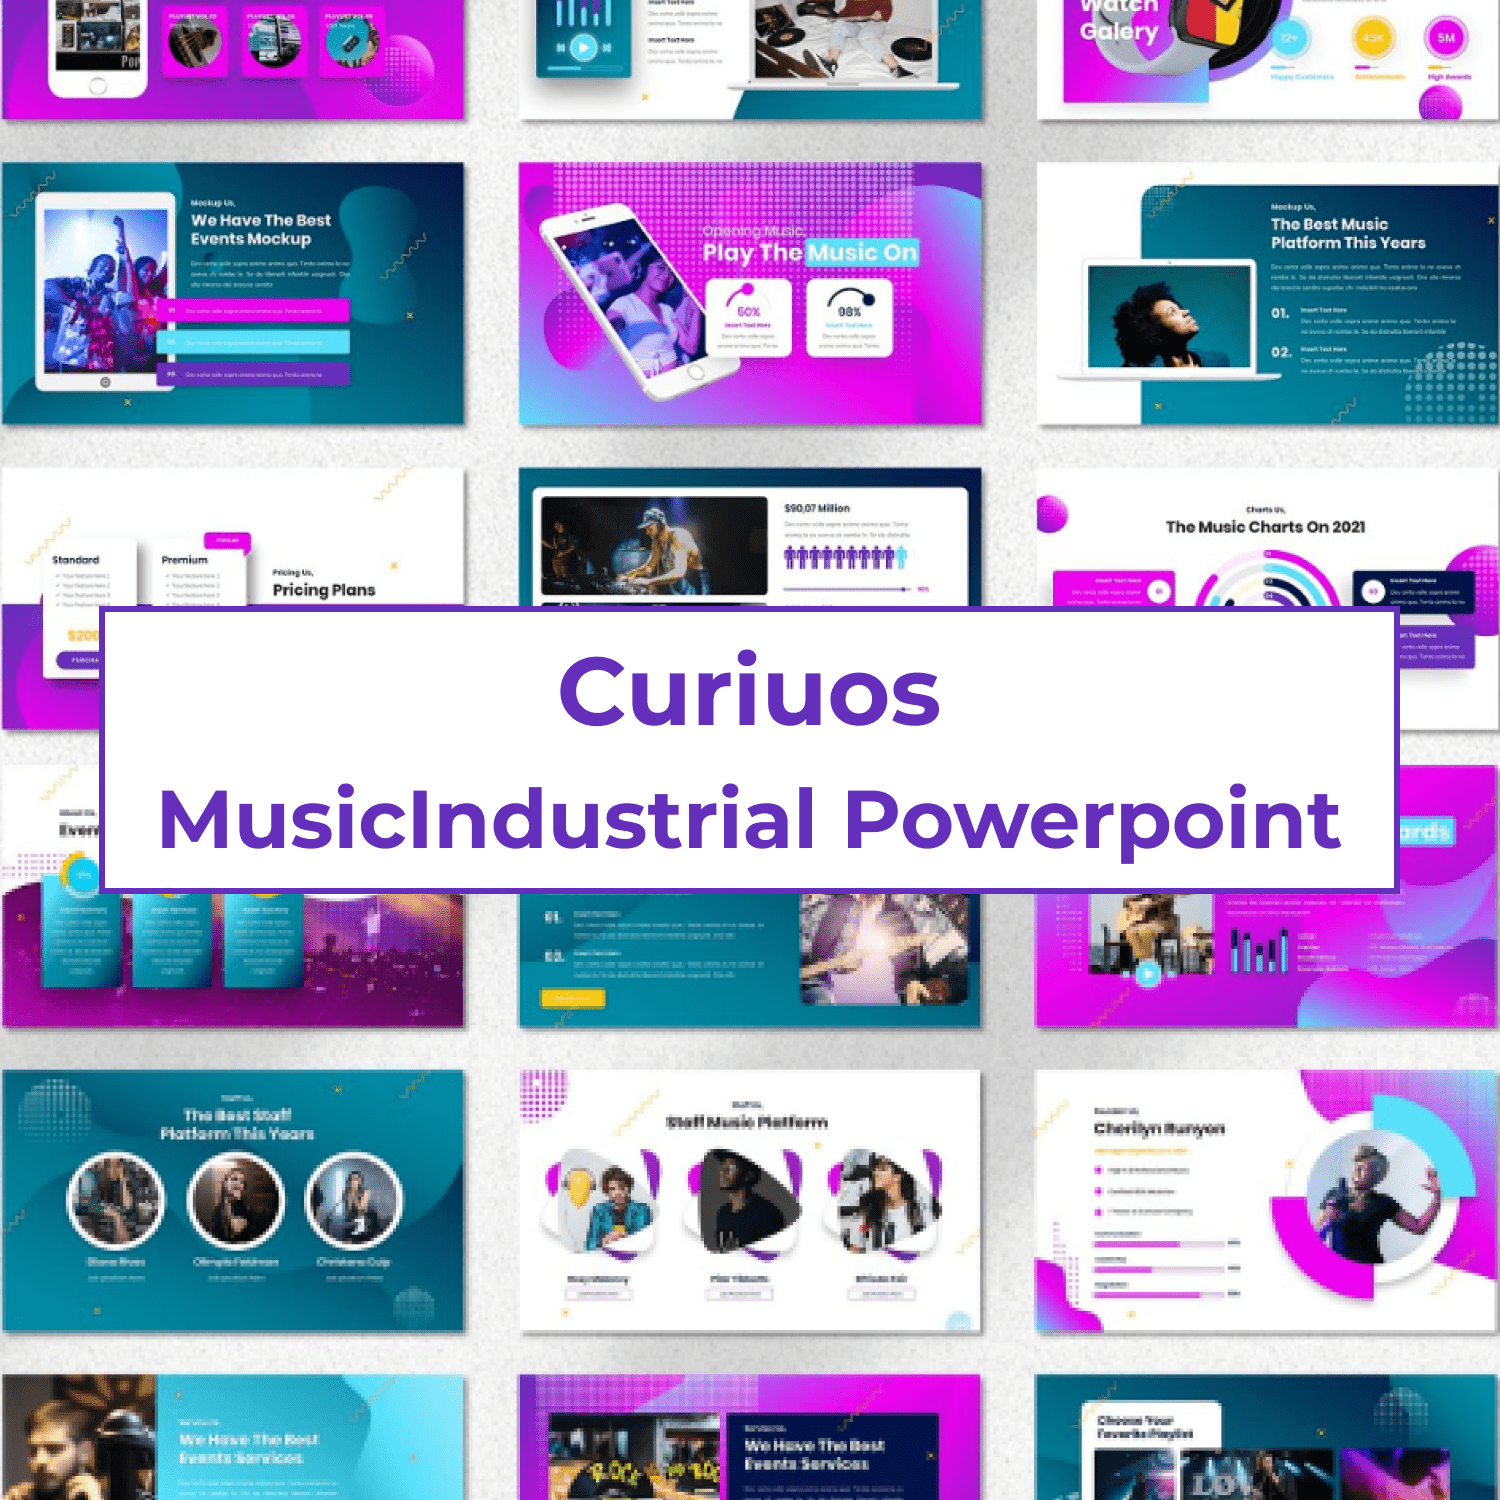 Curiuos - Music Industrial Powerpoint cover image.